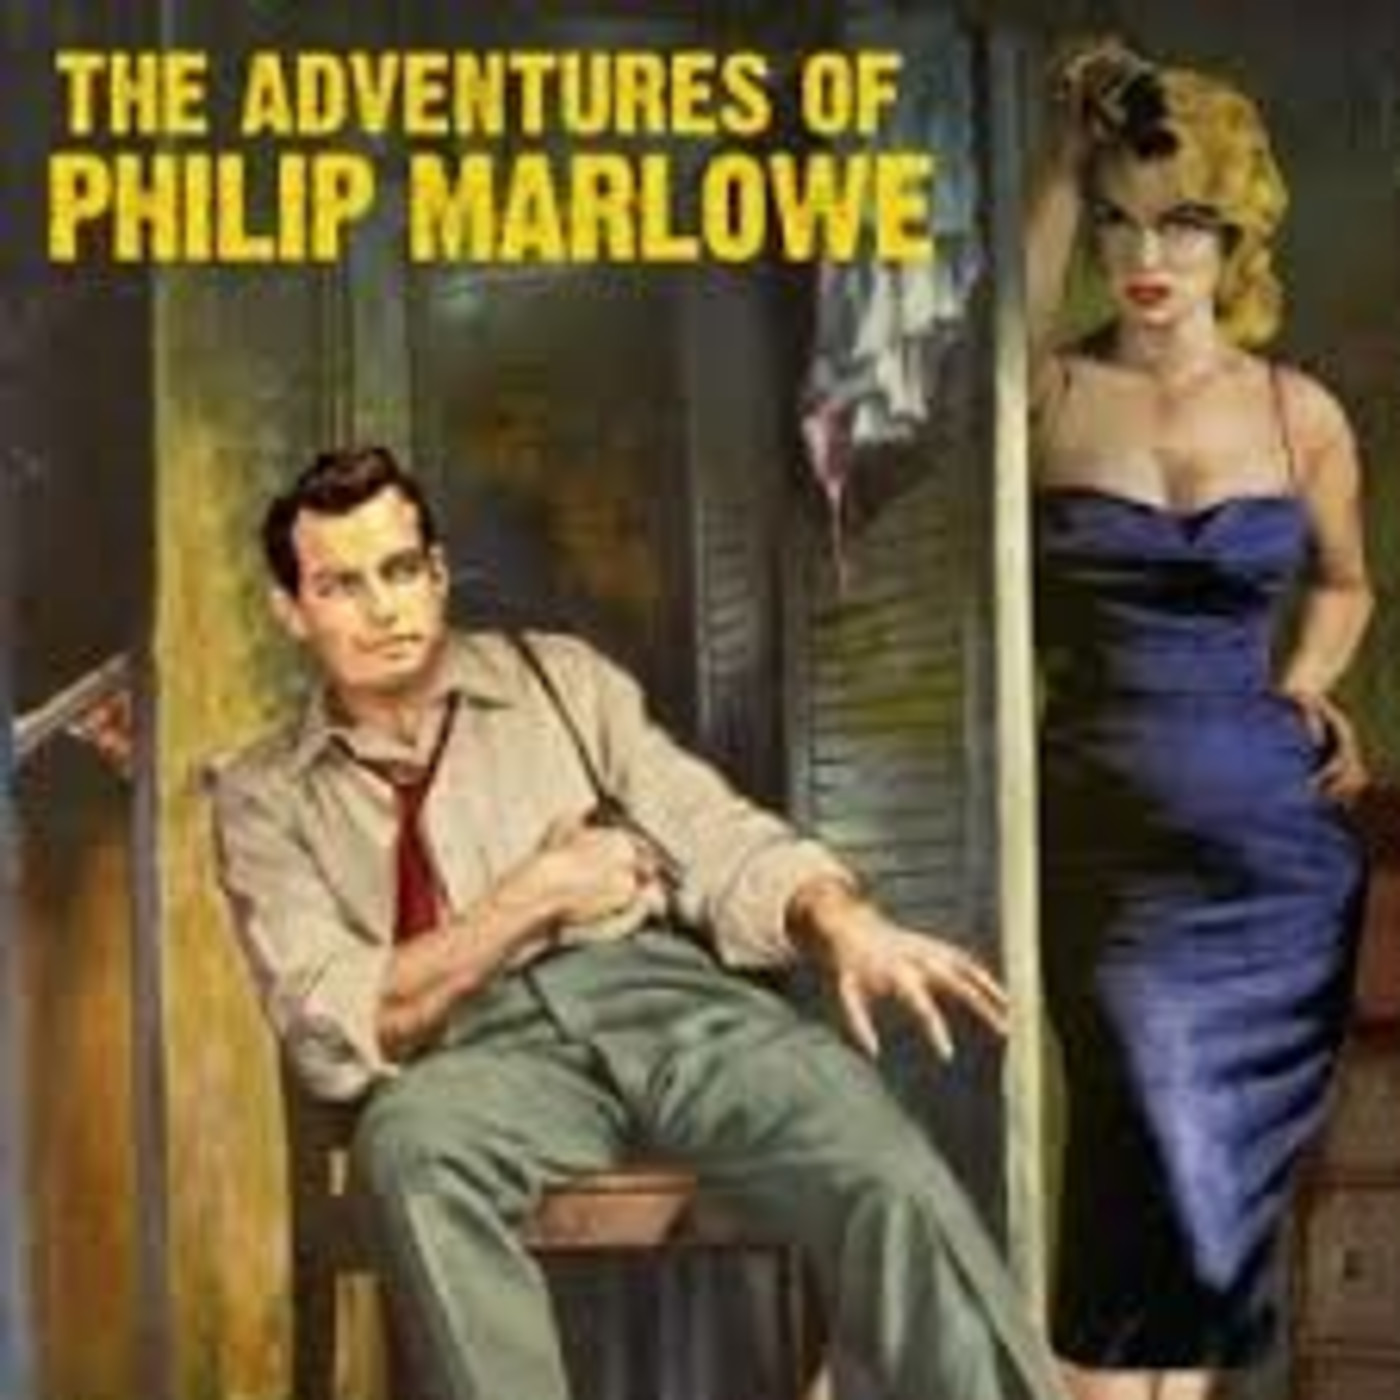 The Adventures of Philip Marlowe - Dude from Manhattan